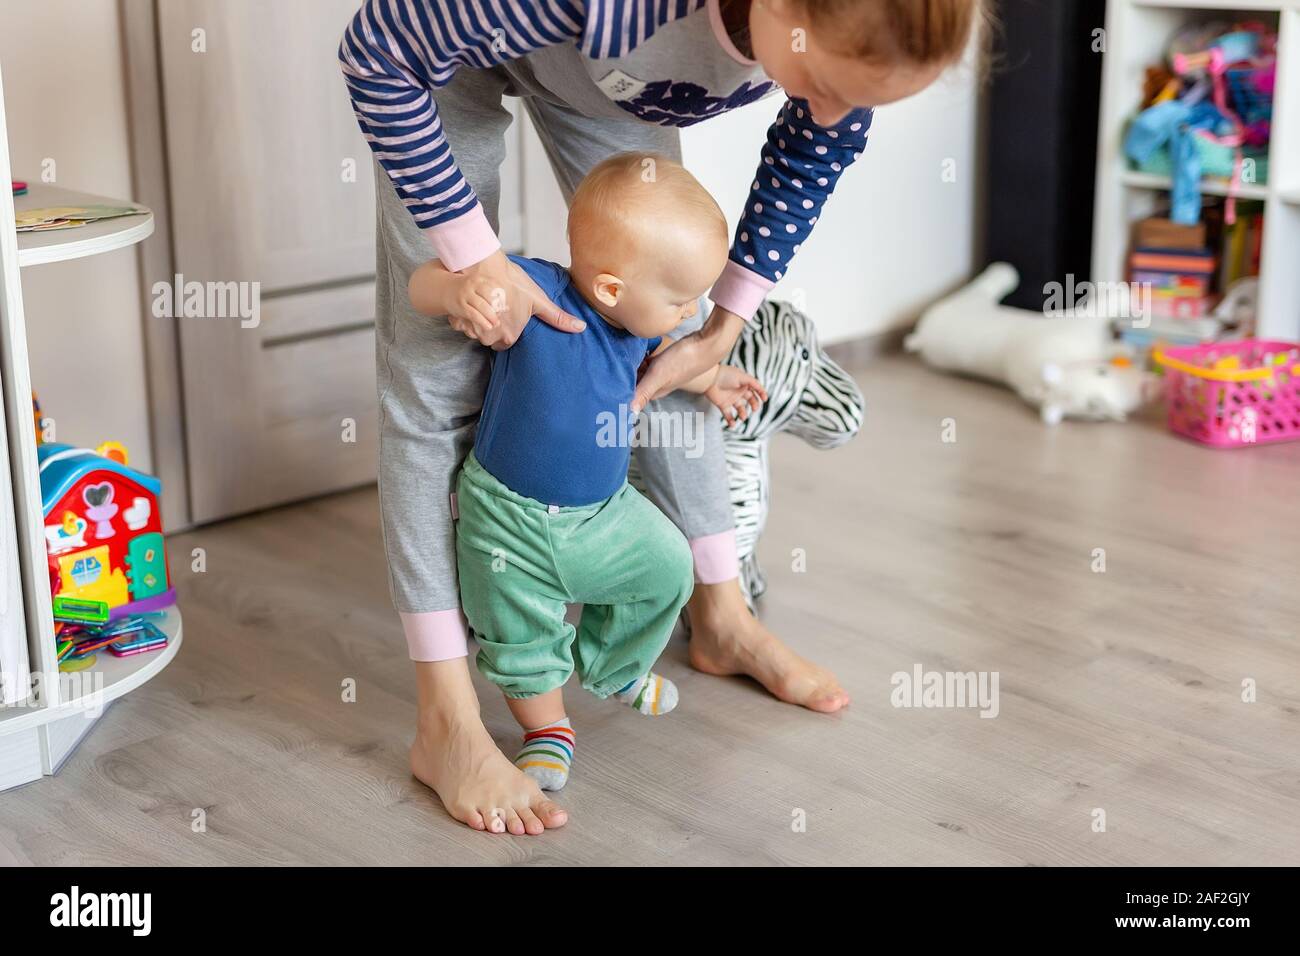 Cute little adorable blond toddler boy making first steps with mother support in playroom at home. Happy funny child learning to walk with mom help Stock Photo